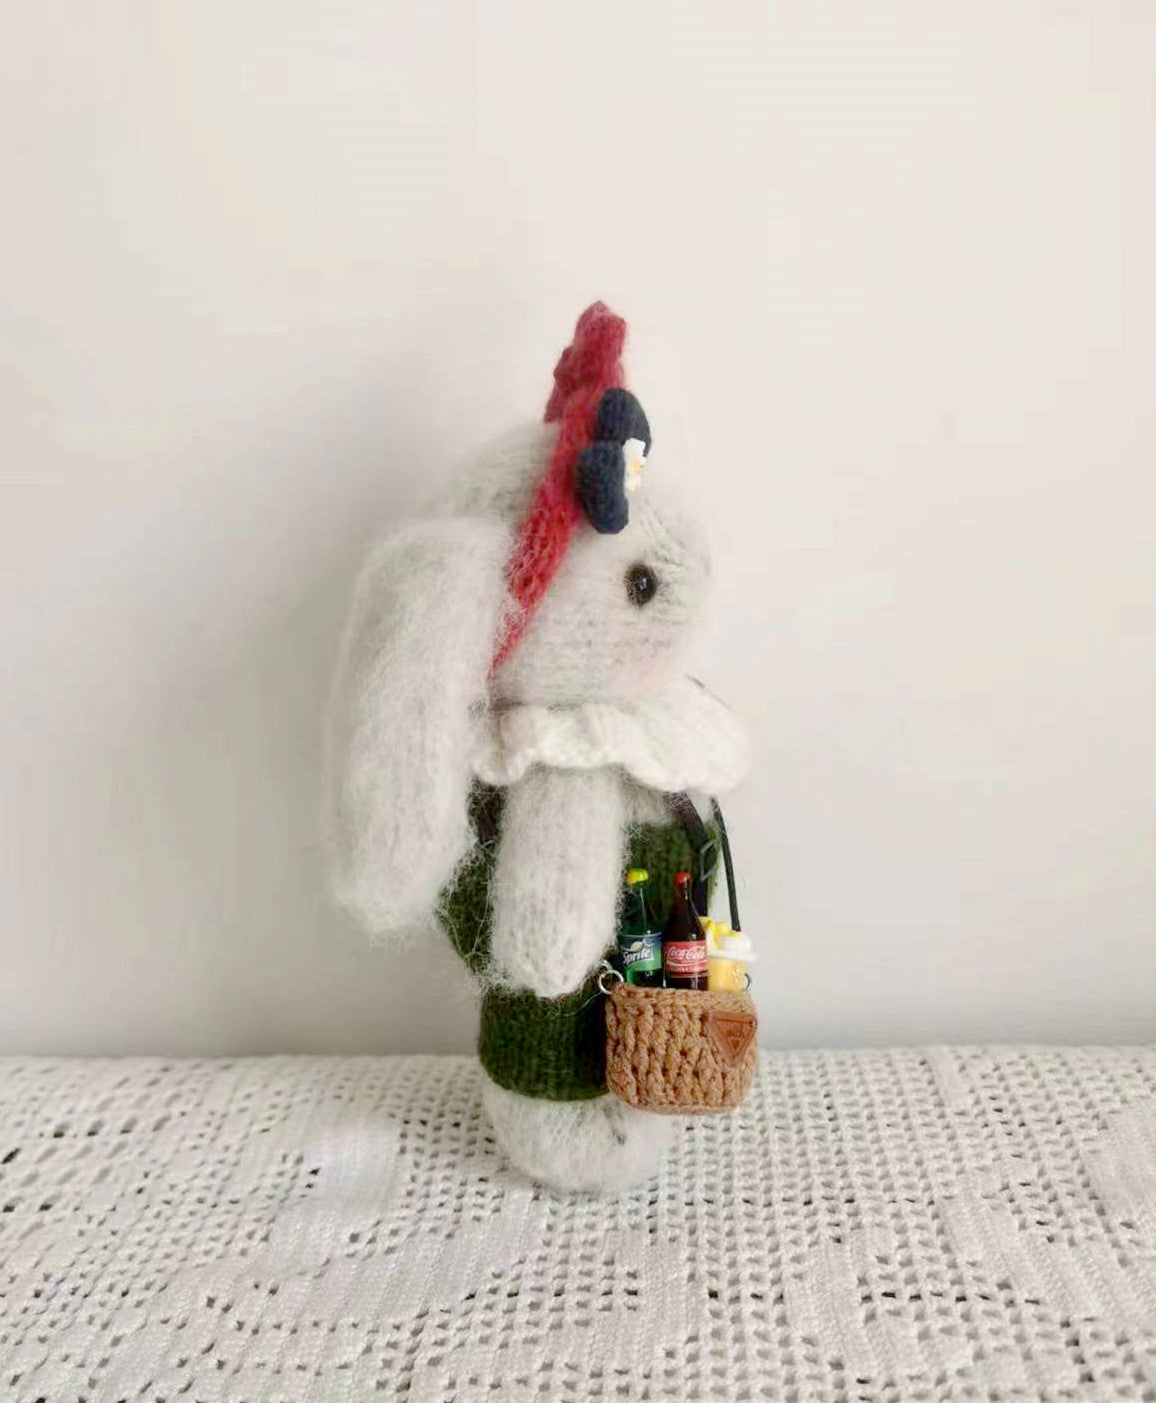 Handmade Bunny Doll Great for Children's Room Decorations